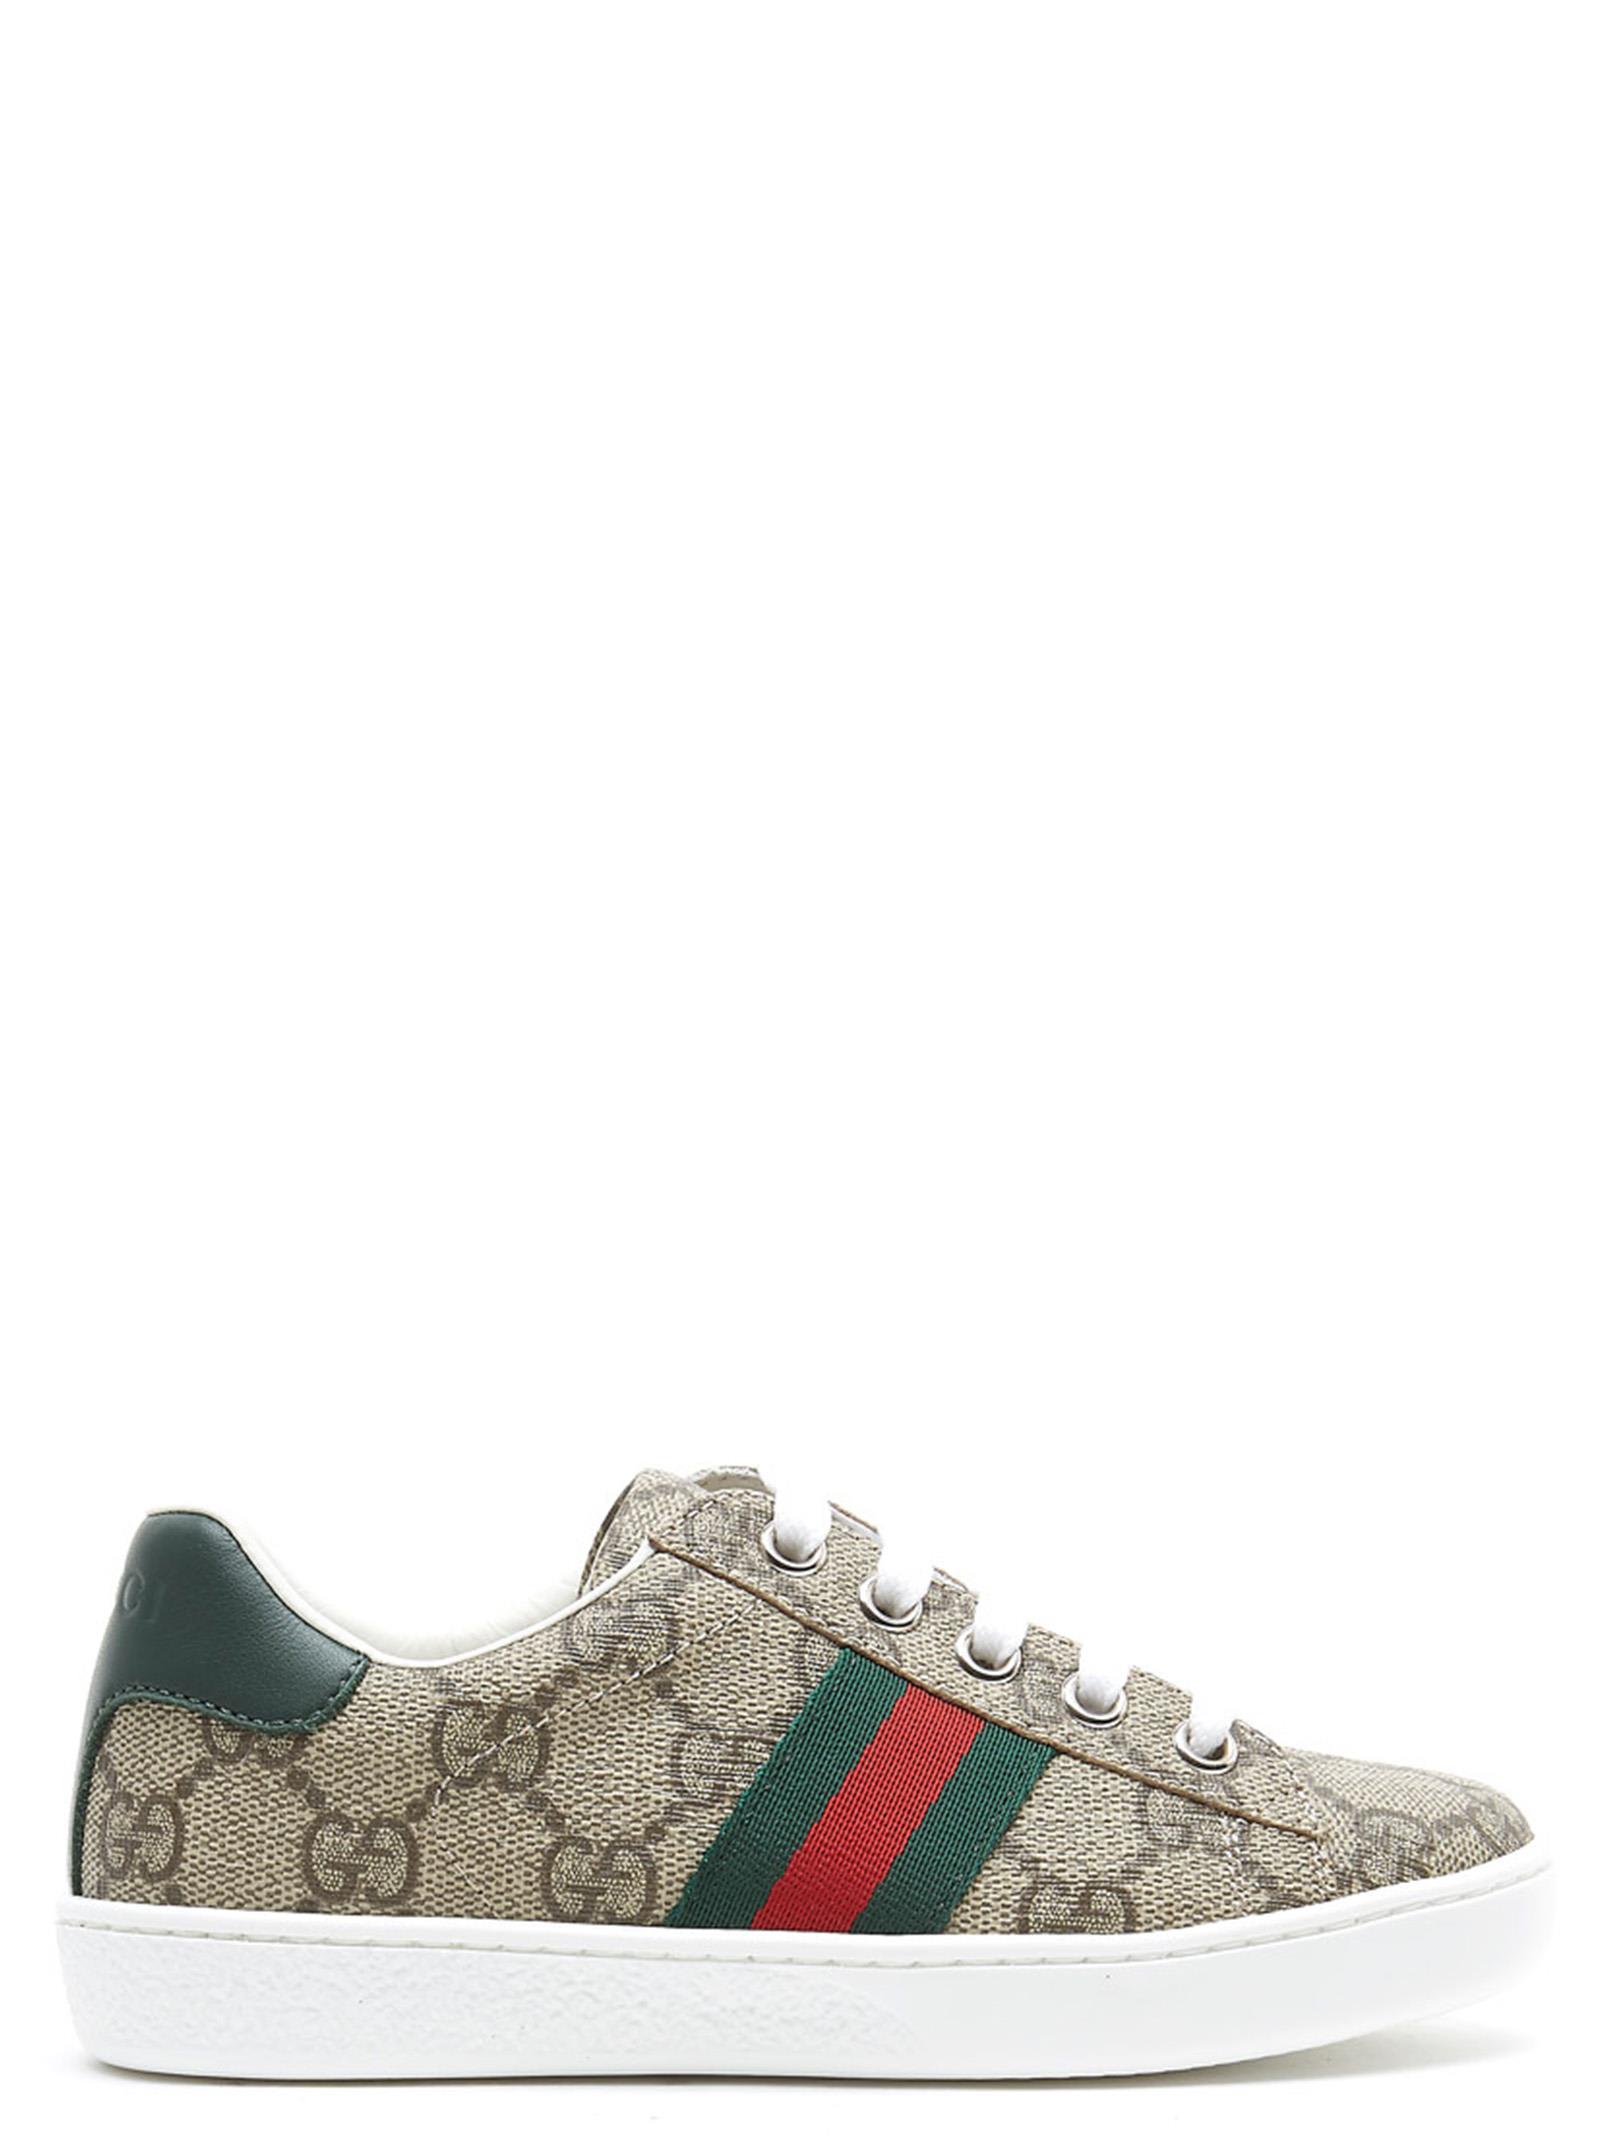 gucci shoes guccy